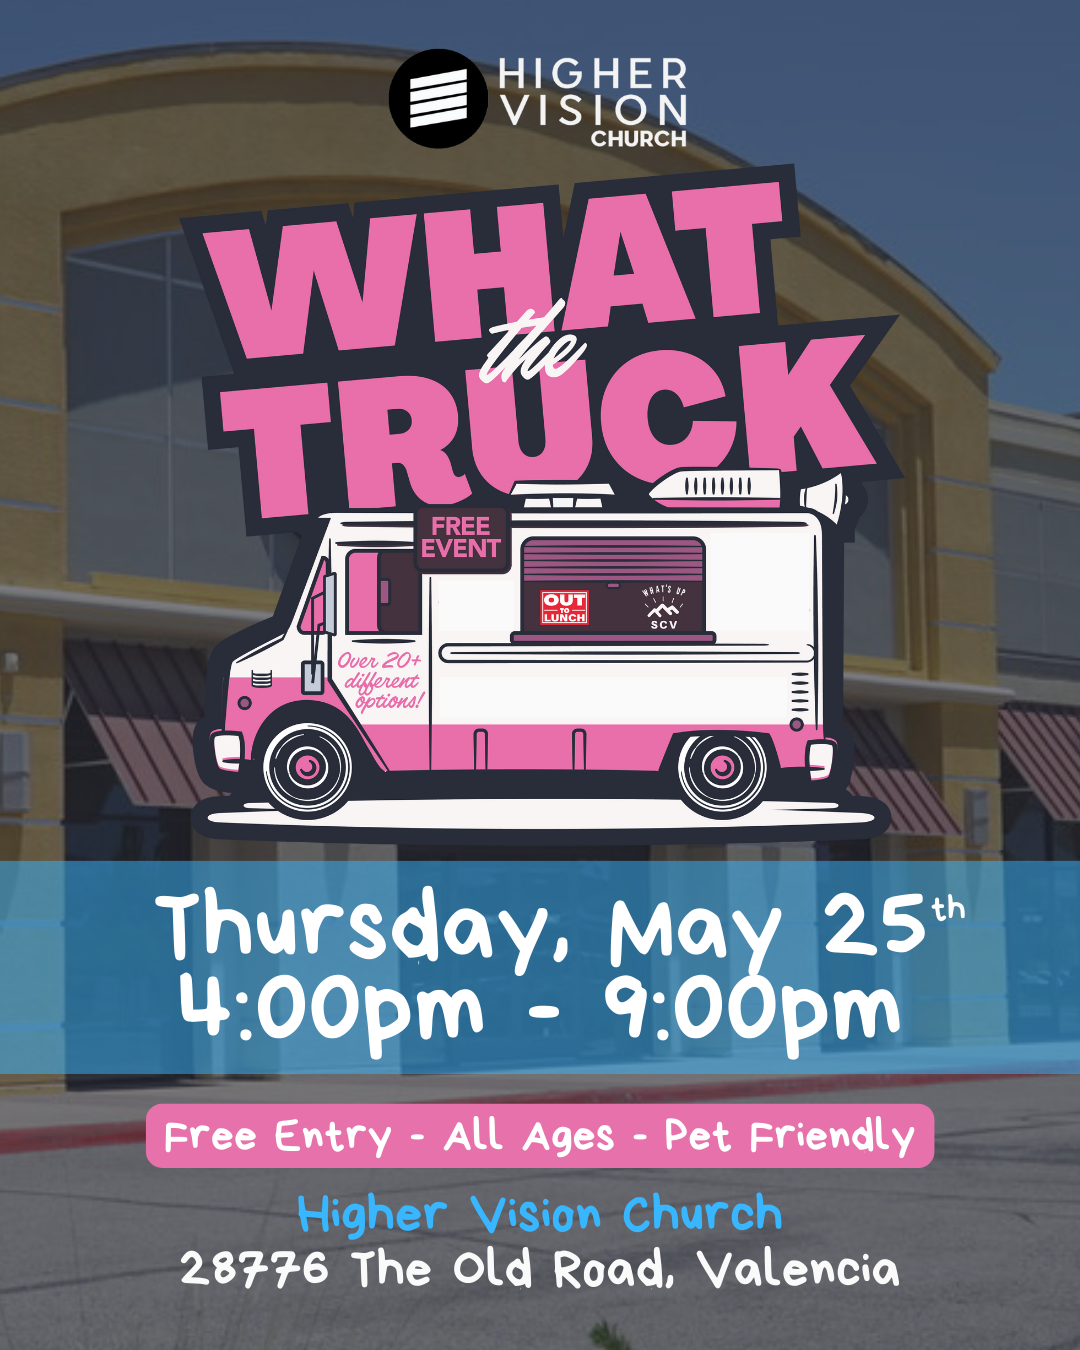 What The Truck - Thursday, May 25th - Higher Vision Church